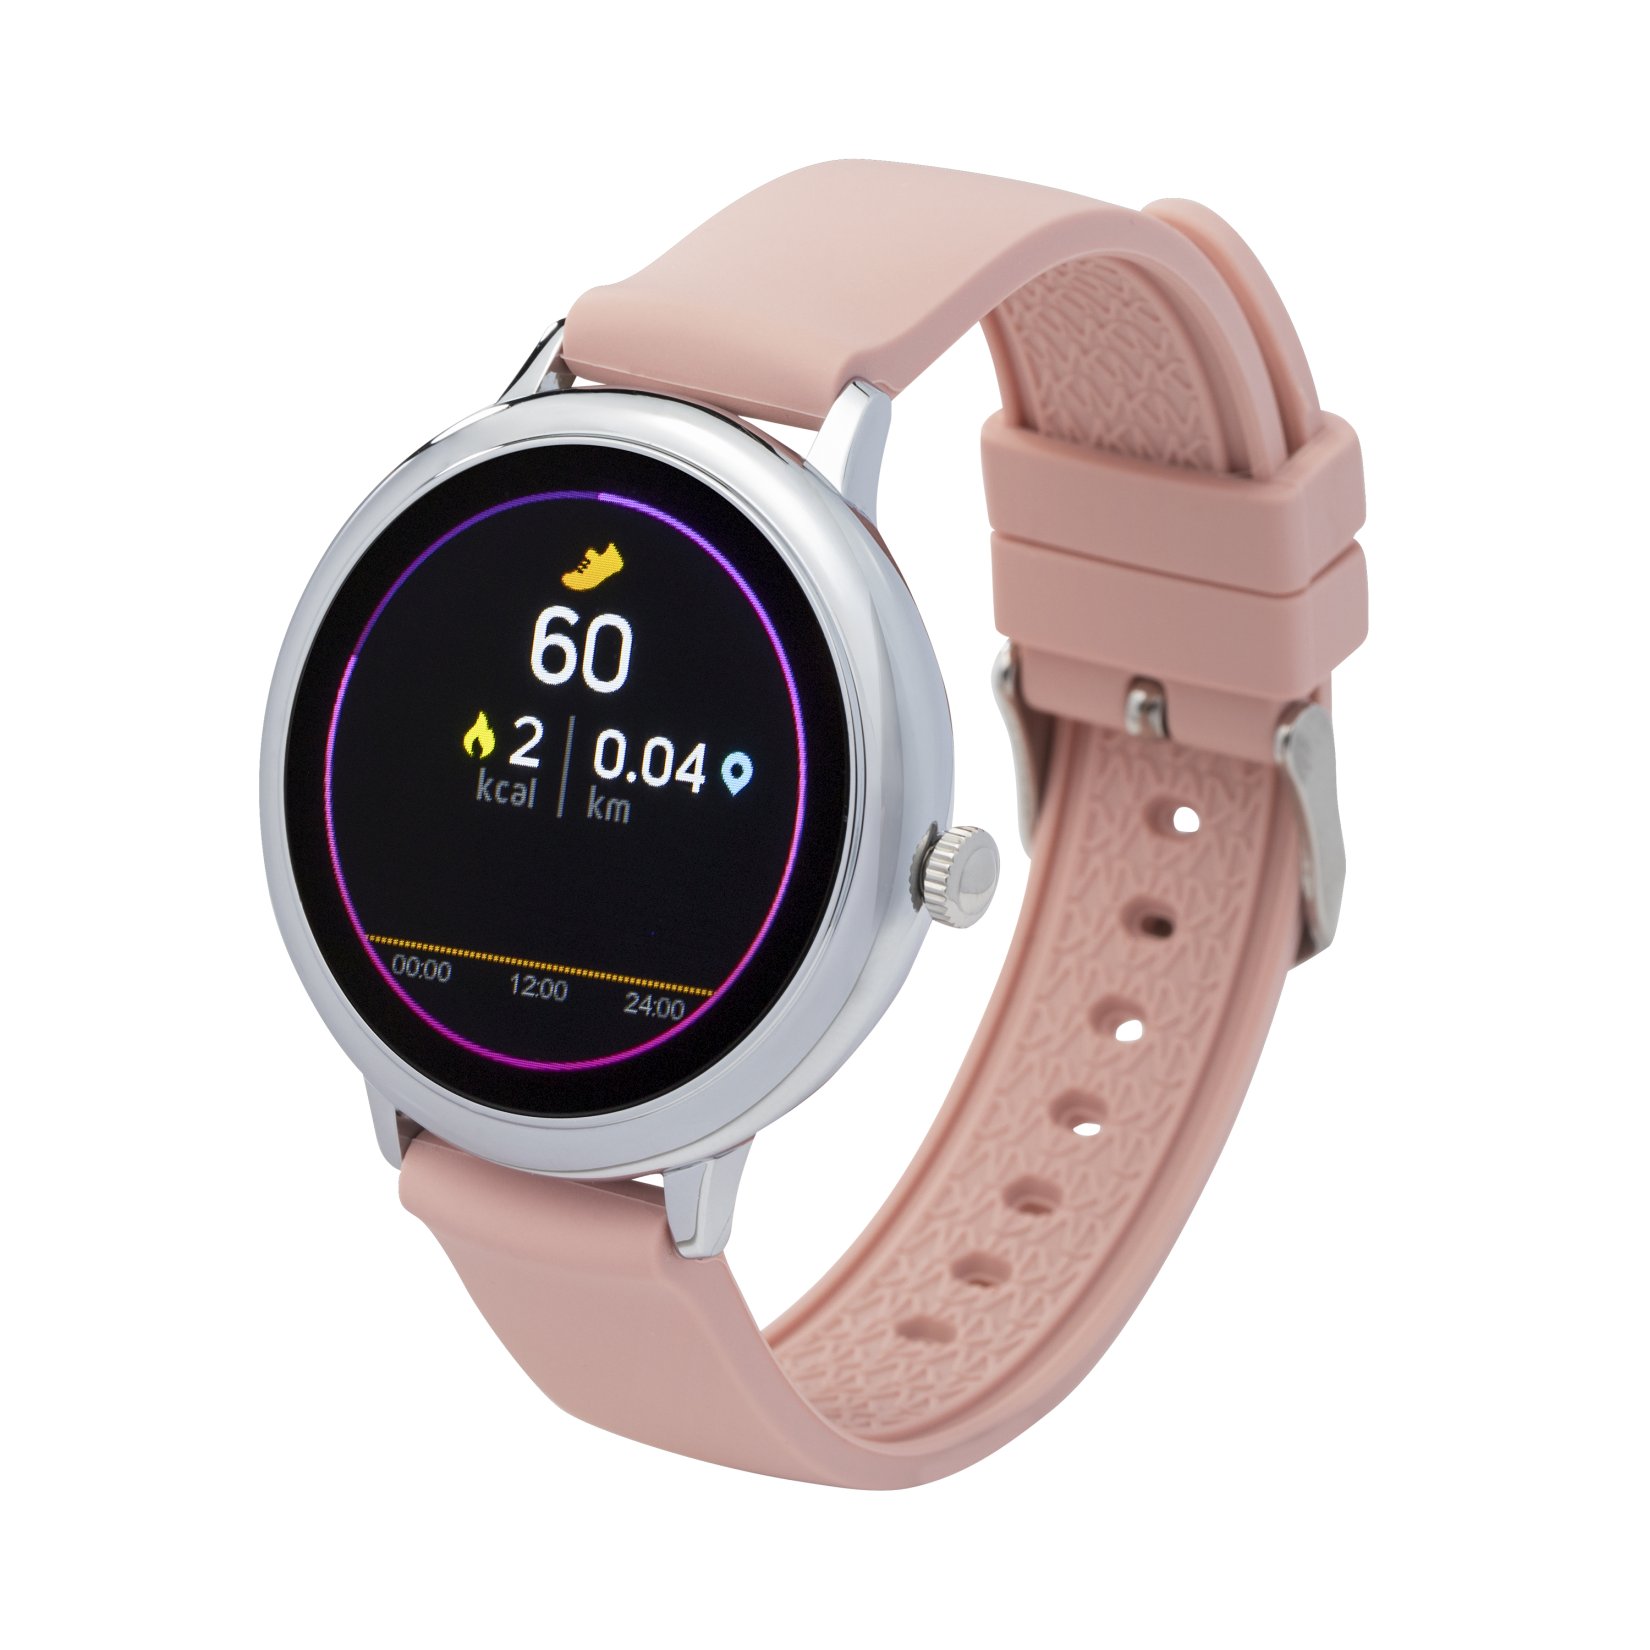 Fitness tracker / smartwatch with interchangeable wristband pink / gray